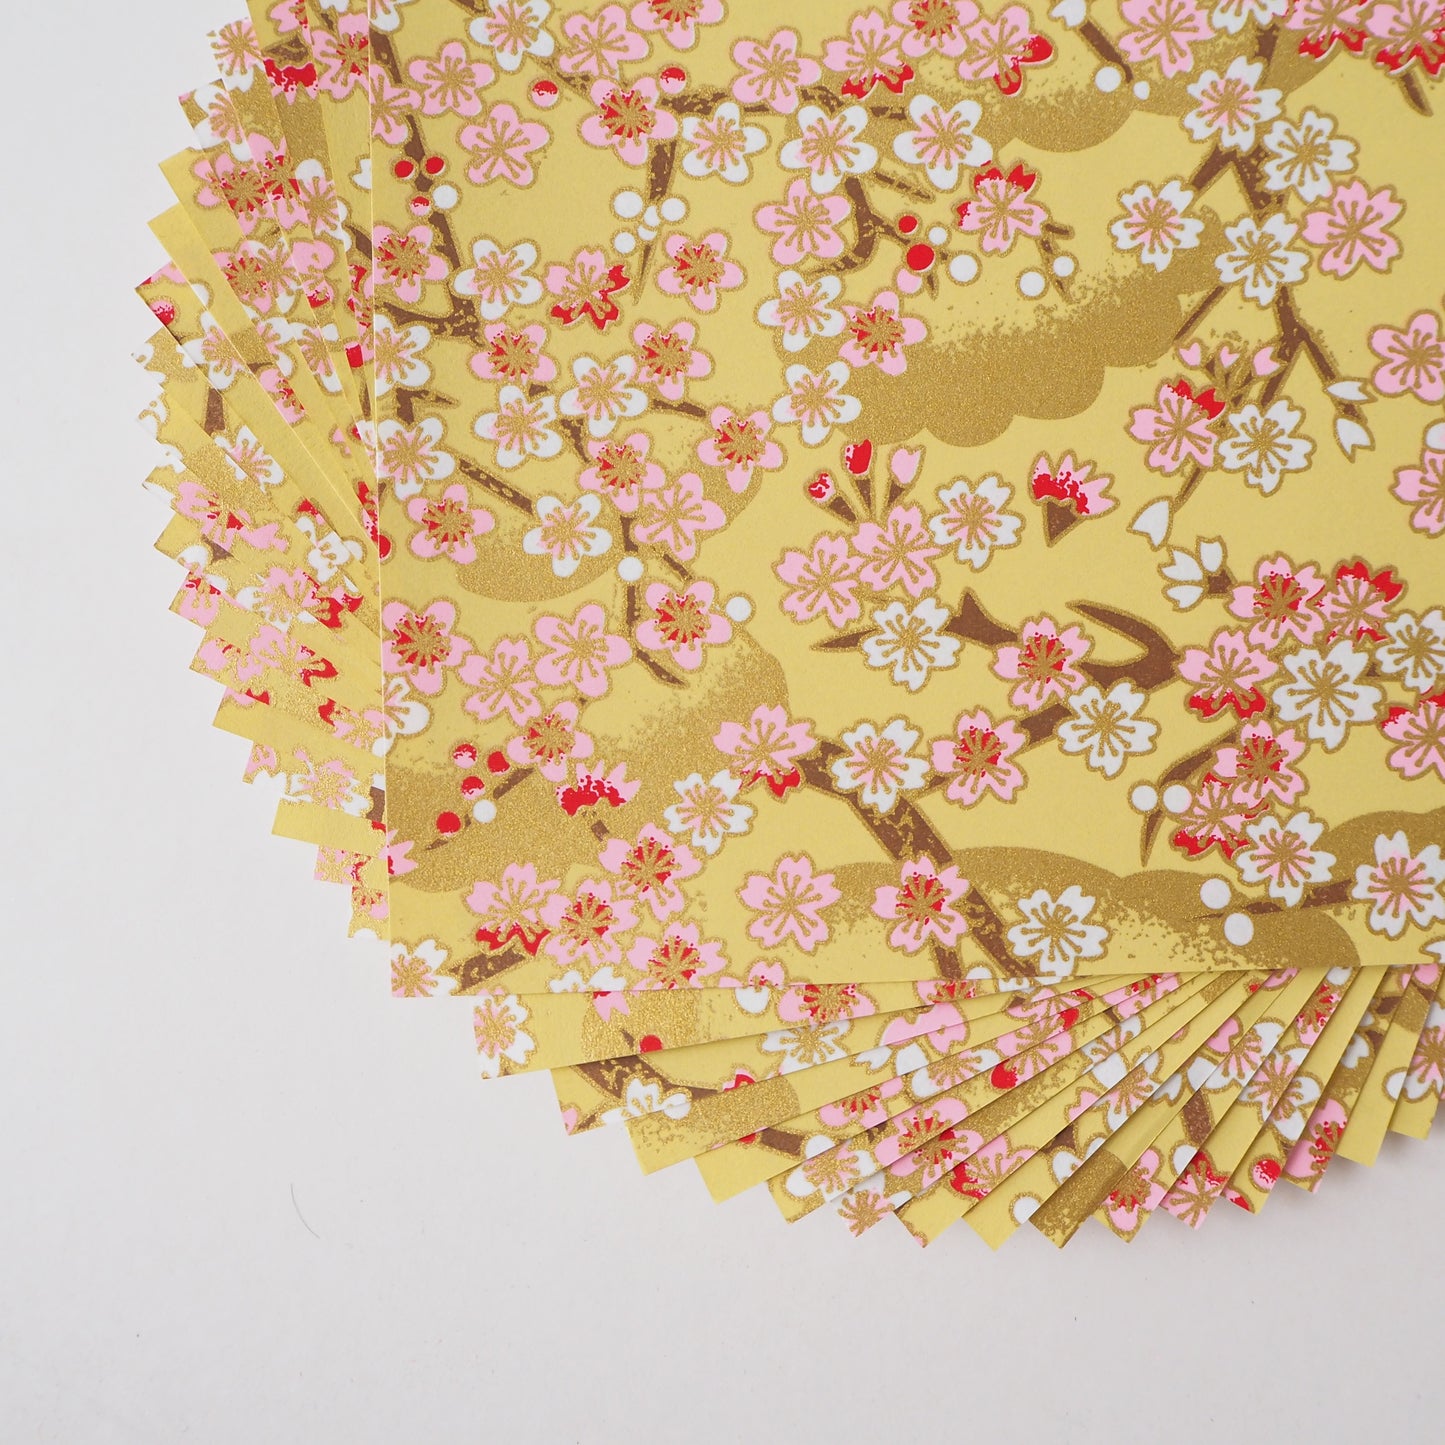 Pack of 20 Sheets 14x14cm Yuzen Washi Origami Paper HZ-208 - Cherry Blossom Branches Yellow